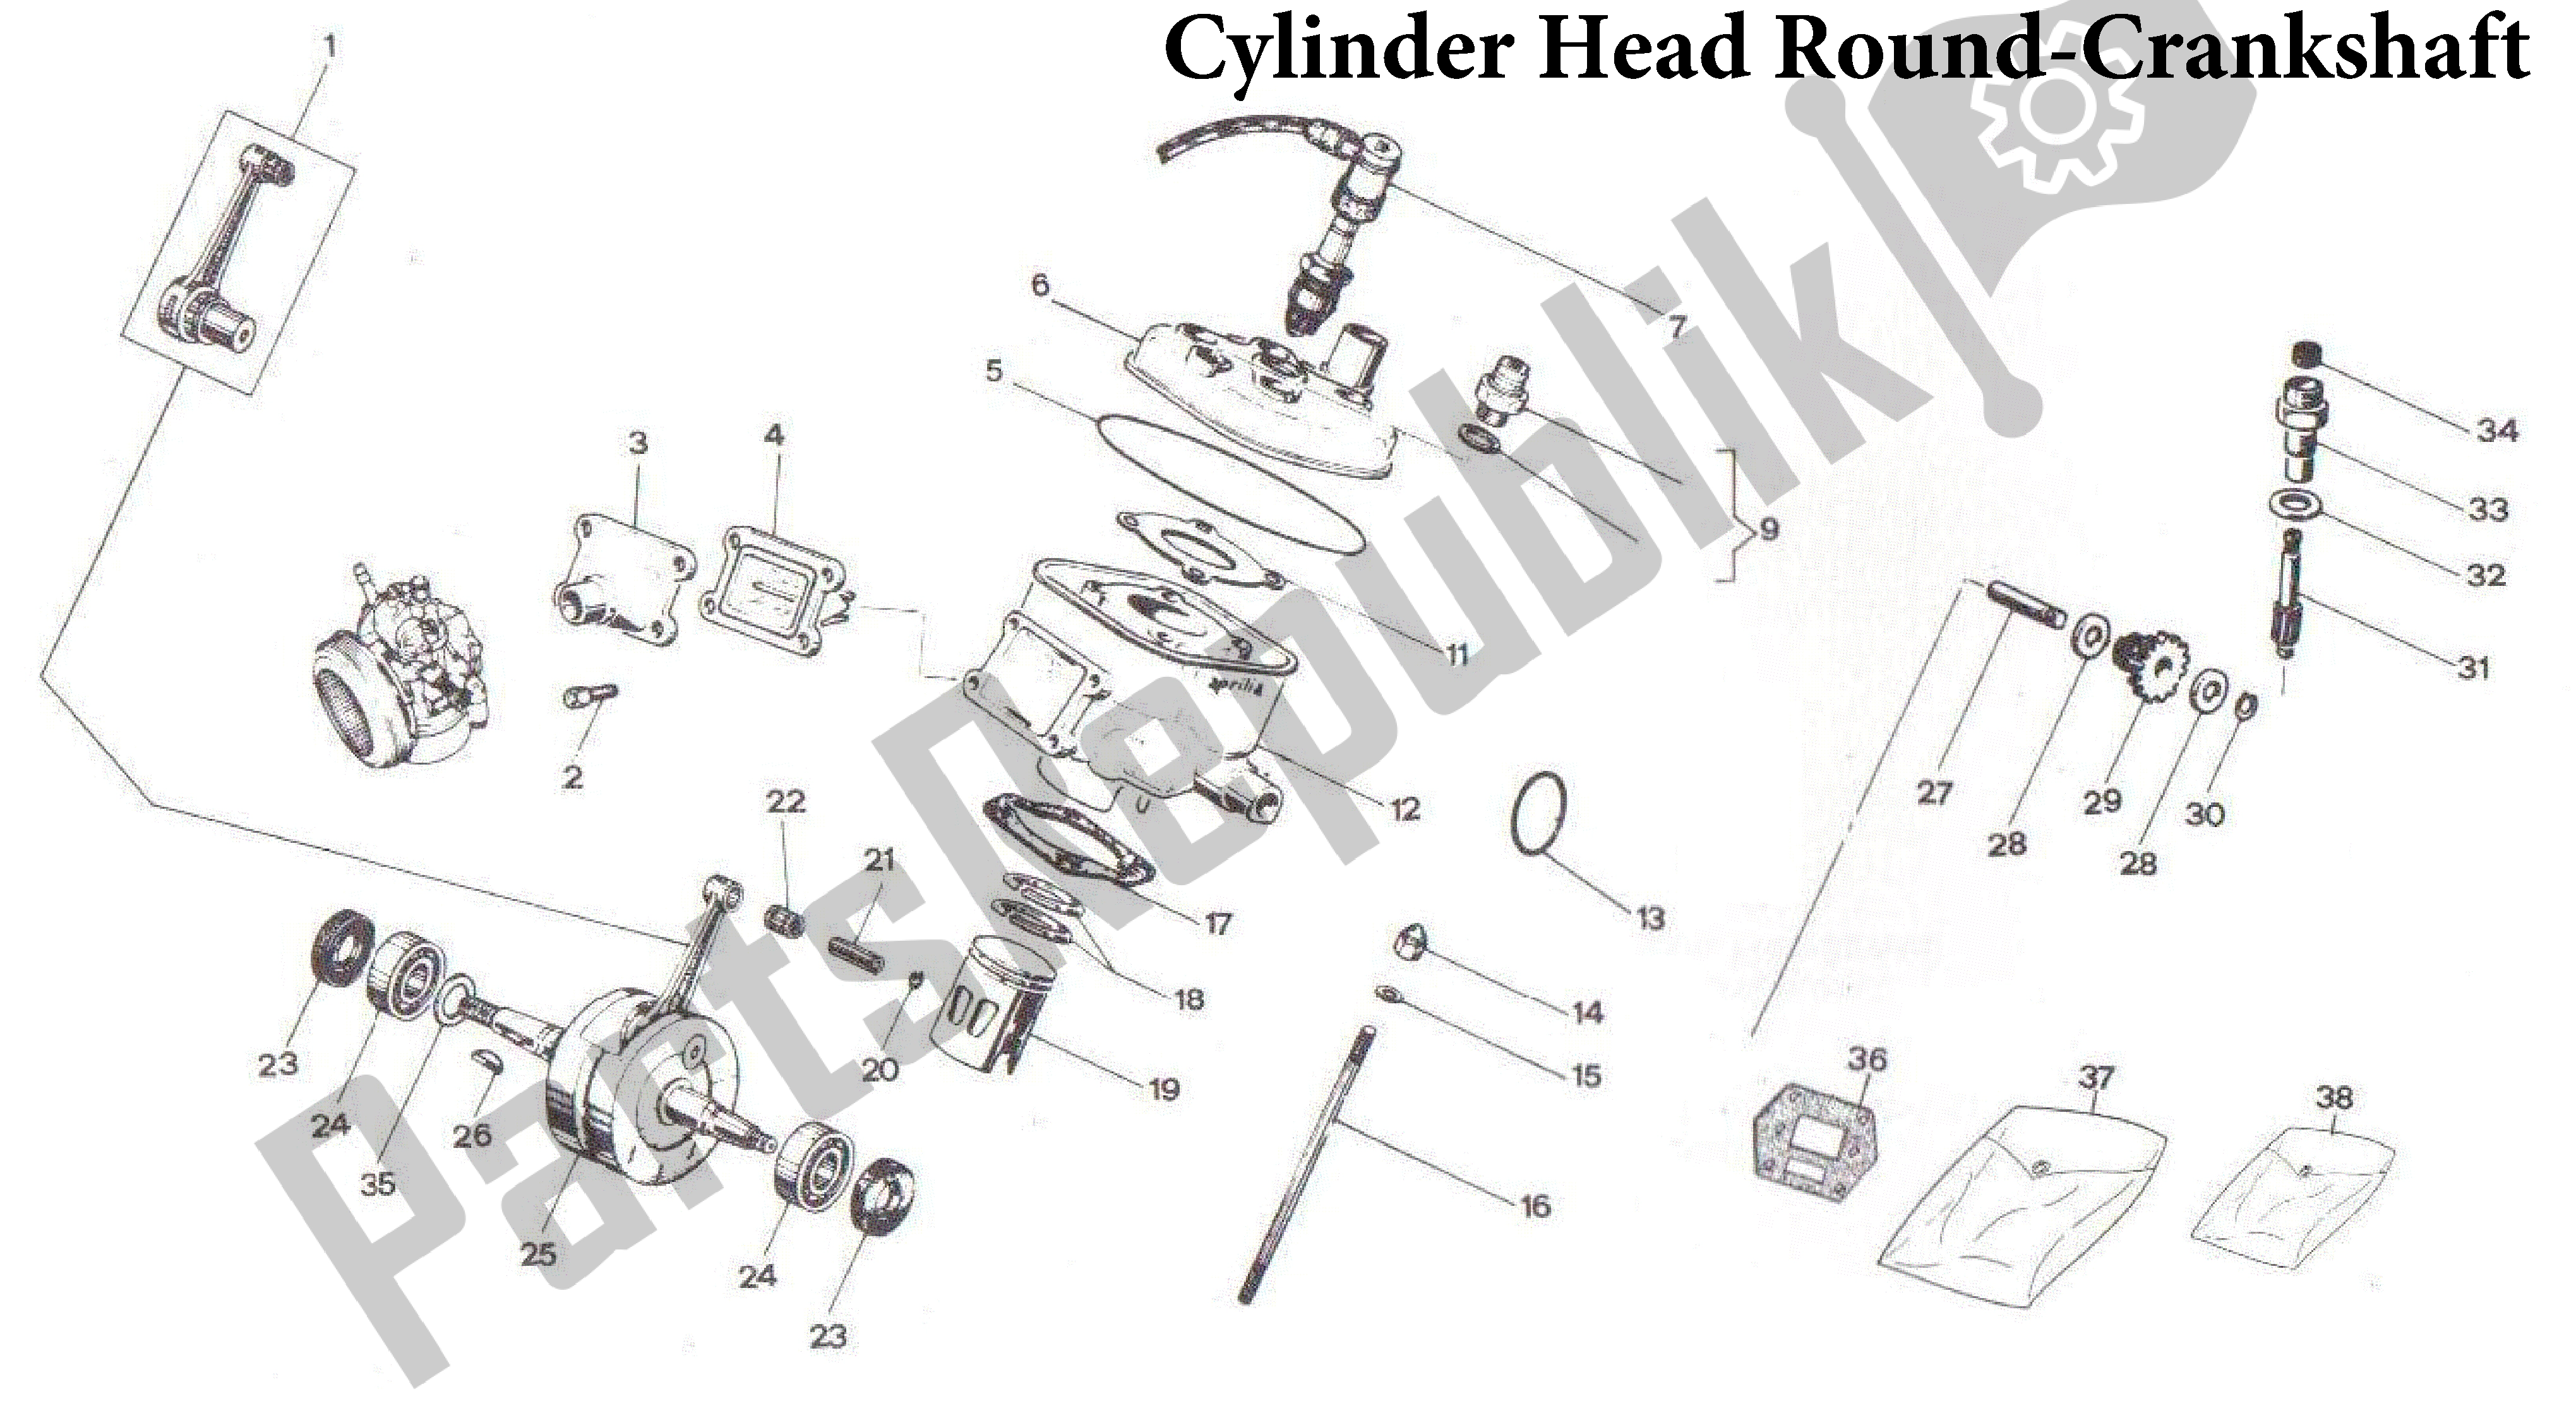 All parts for the Cylinder Head Round-crankshaft of the Aprilia Red Rose 50 1992